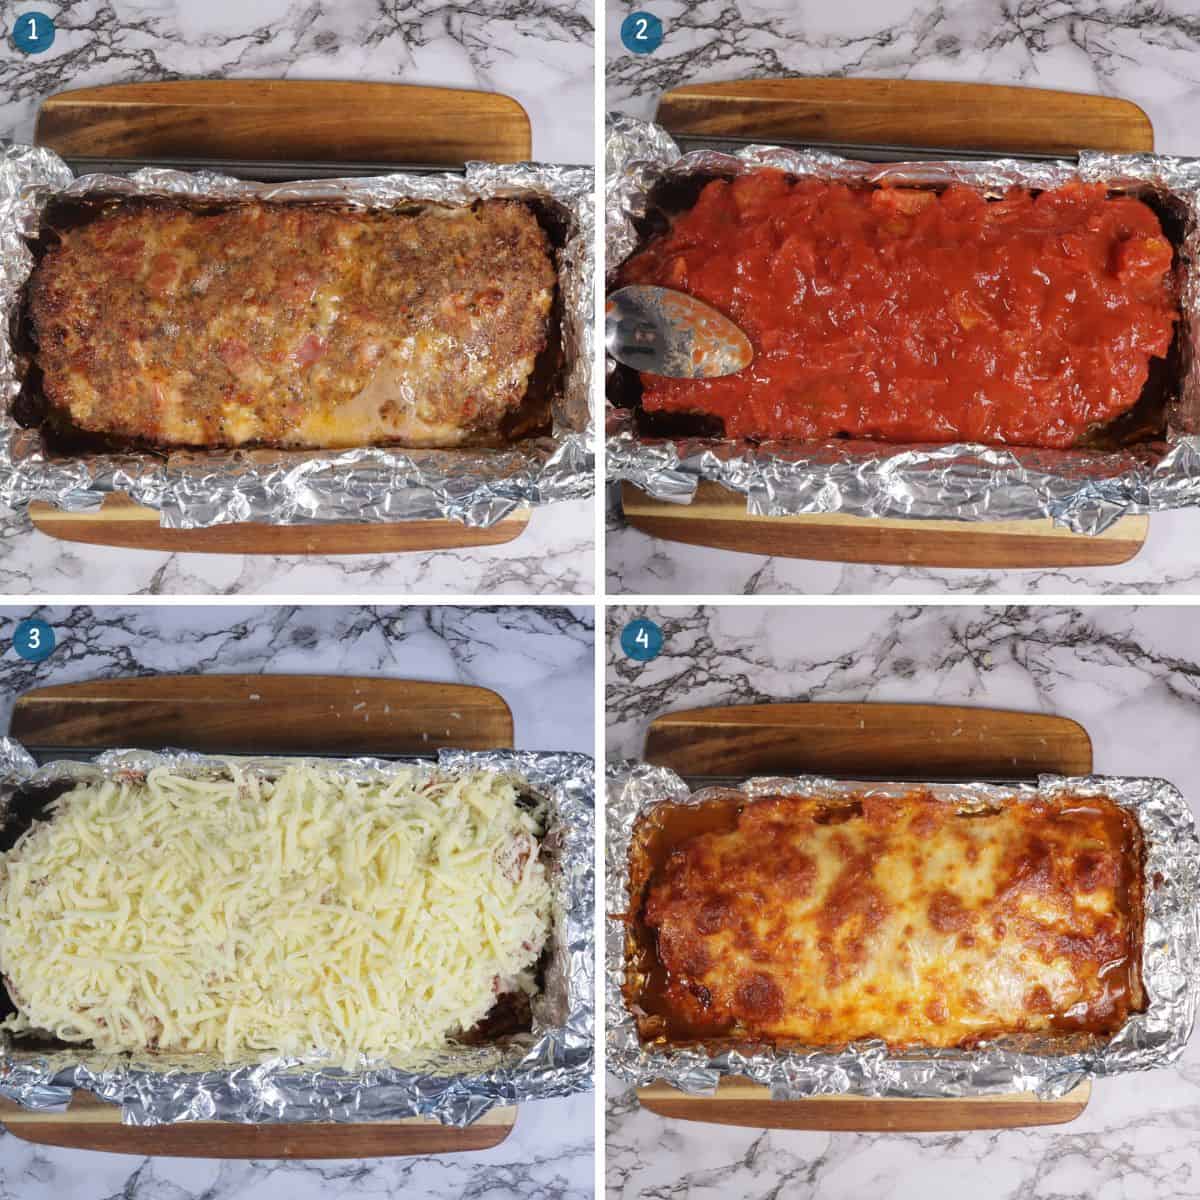 Baking your parma-style meatloaf